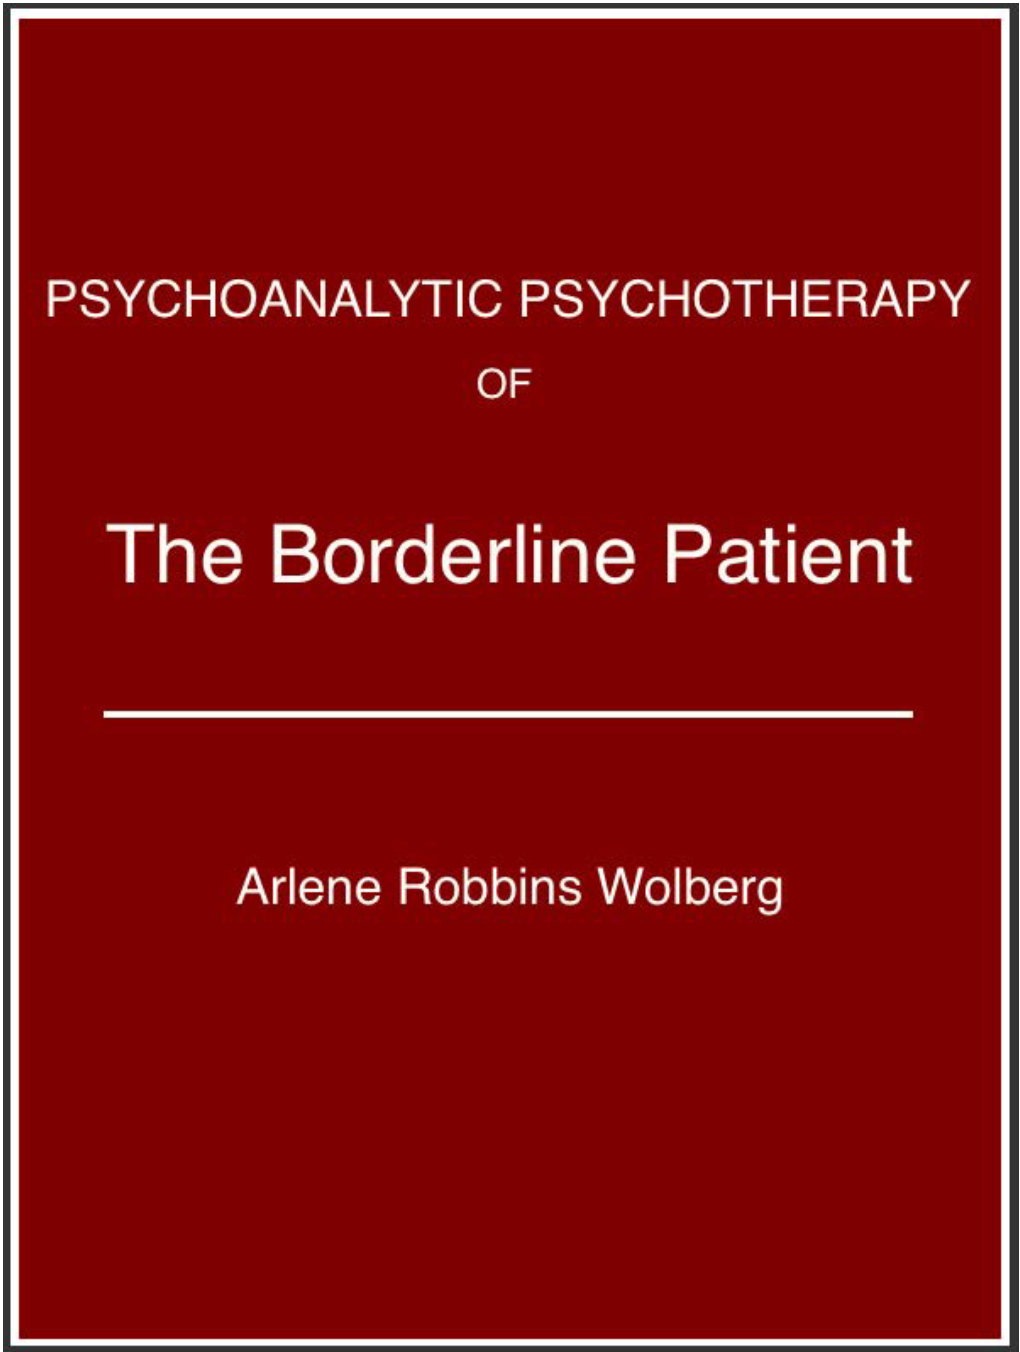 Psychoanalytic Psychotherapy of the Borderline Patient